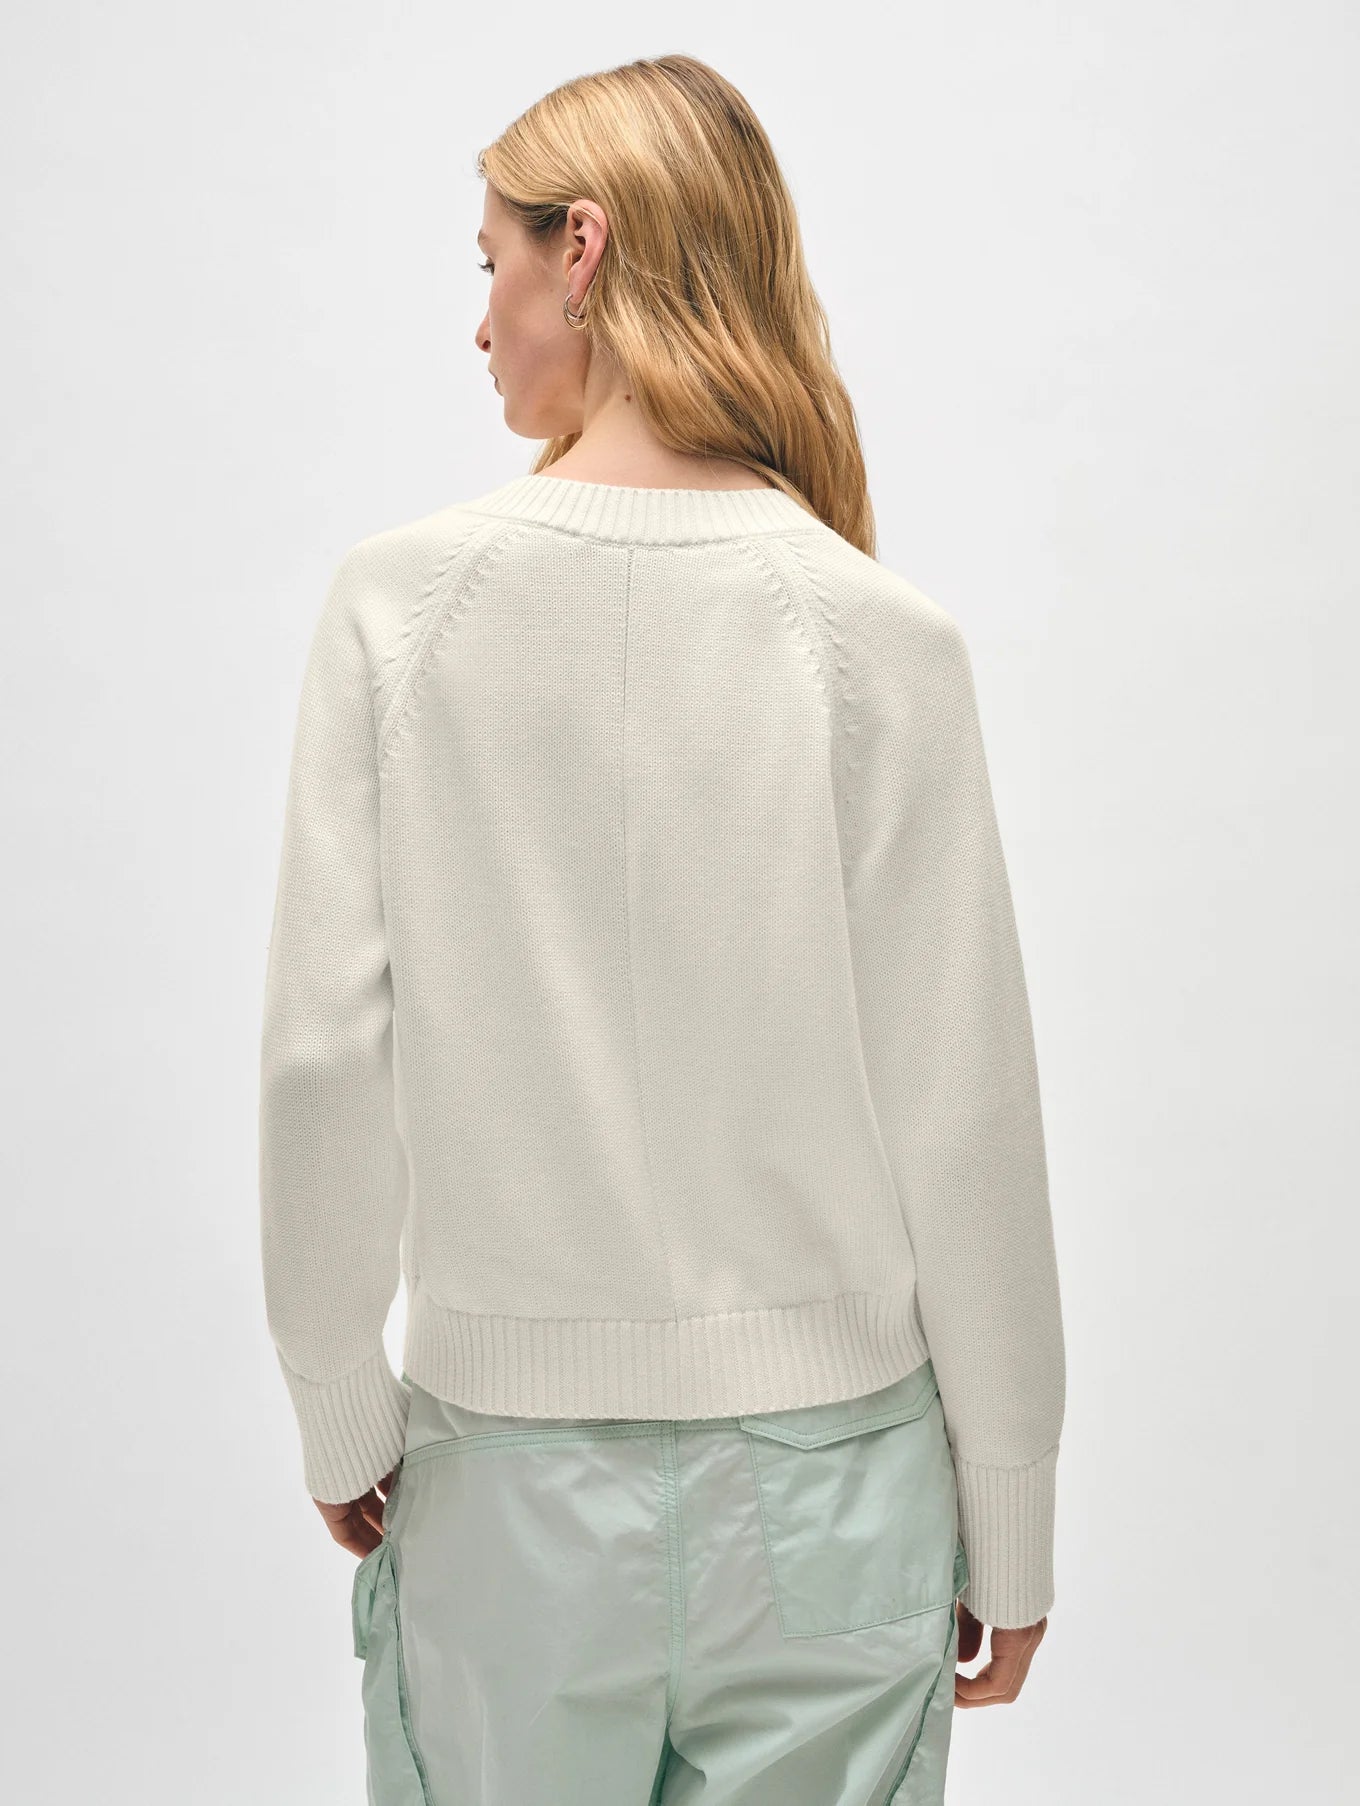 Back view of the White + Warren Organic Cotton V Neck Sweater in the color White